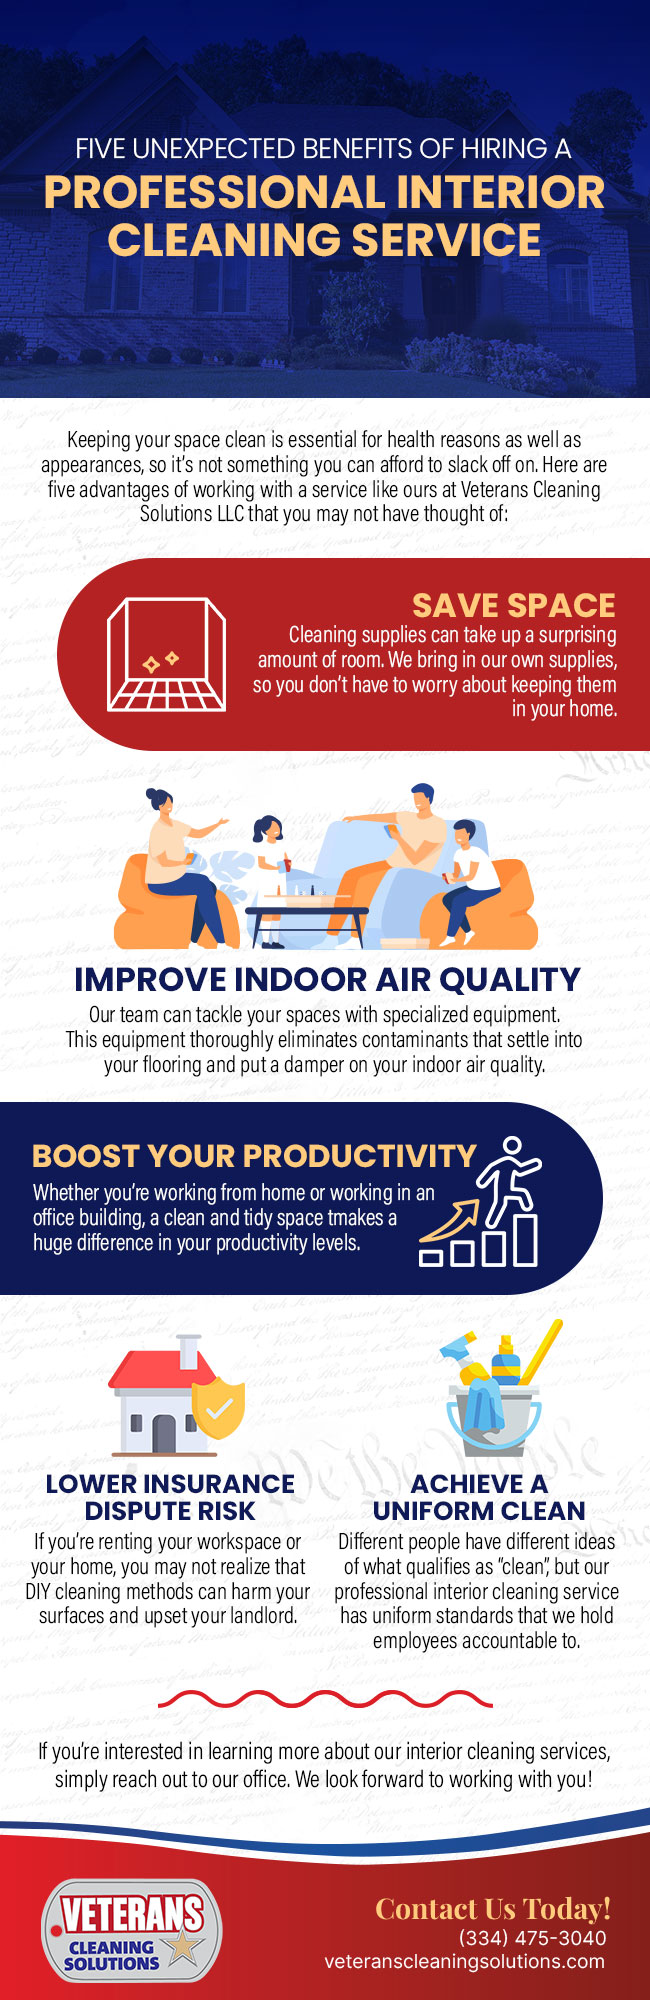 Learn More About the Benefits of Letting Pros Handle Your Interior Cleaning